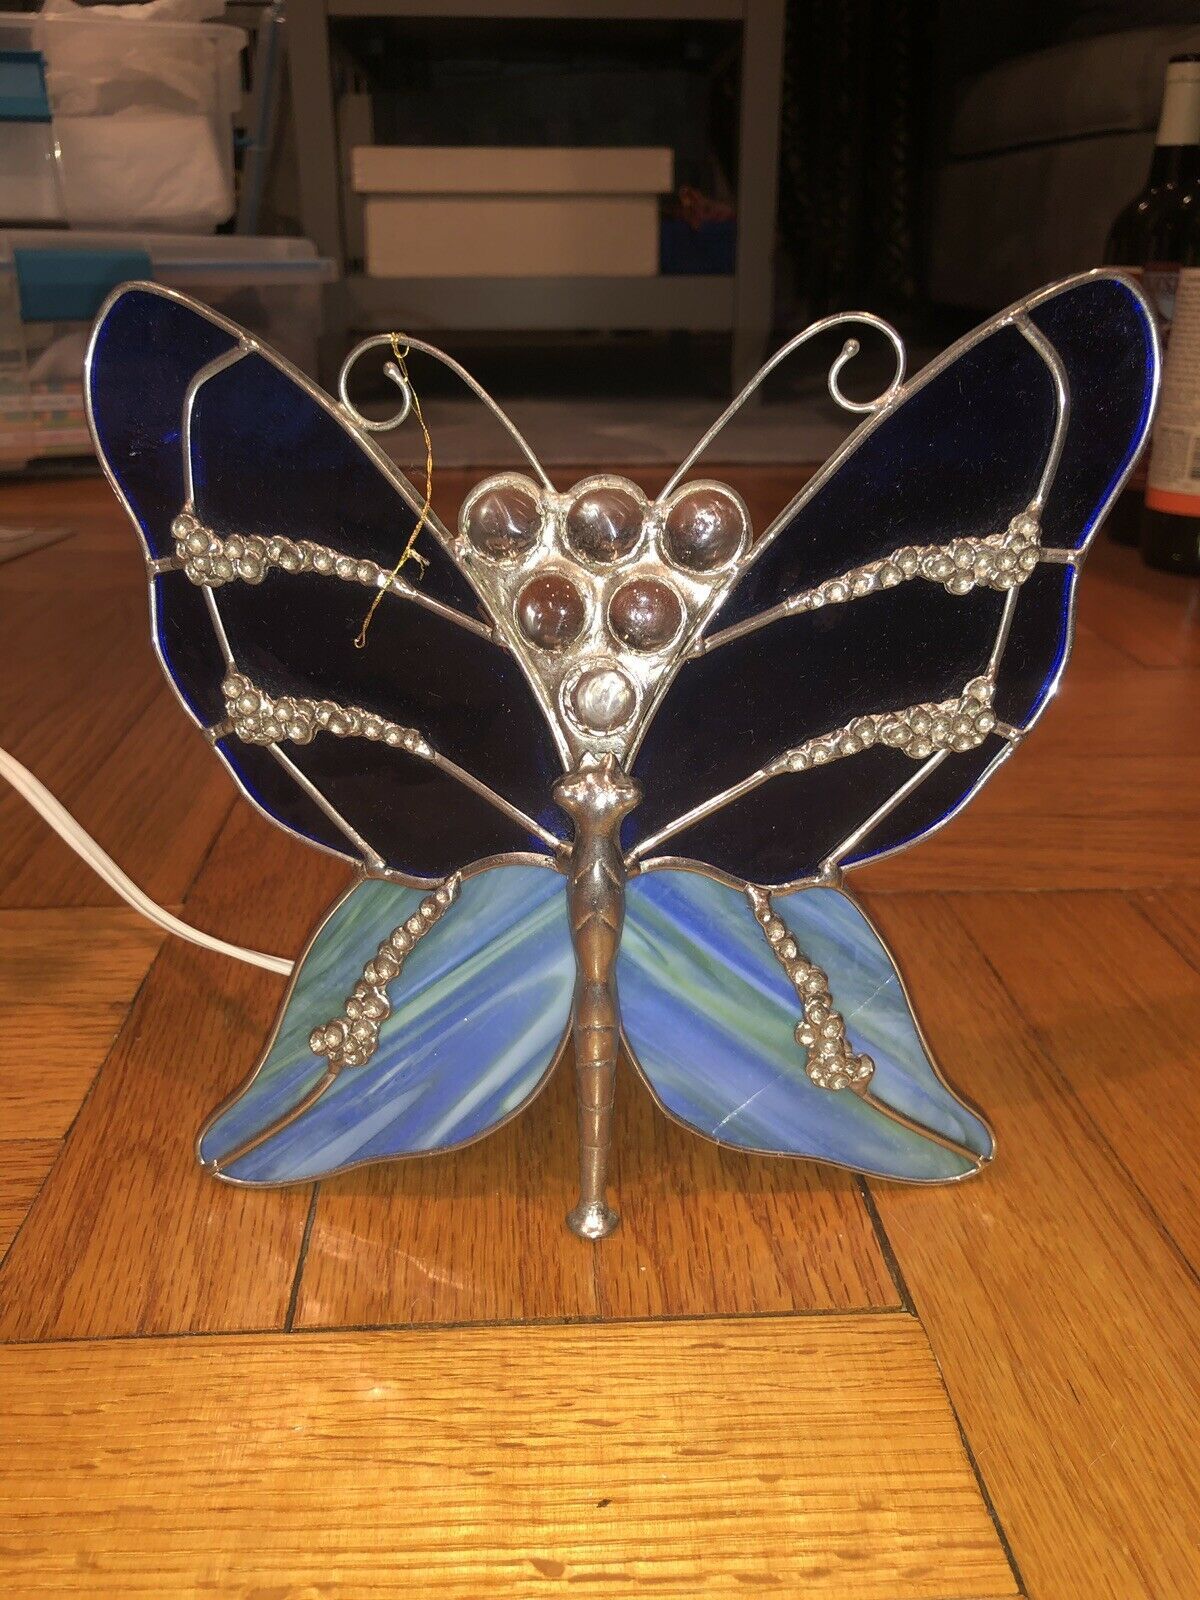 Nursery Night Light Stained Cut Glass Lamp Light Blue Colorful Butterfly Accent - $29.99